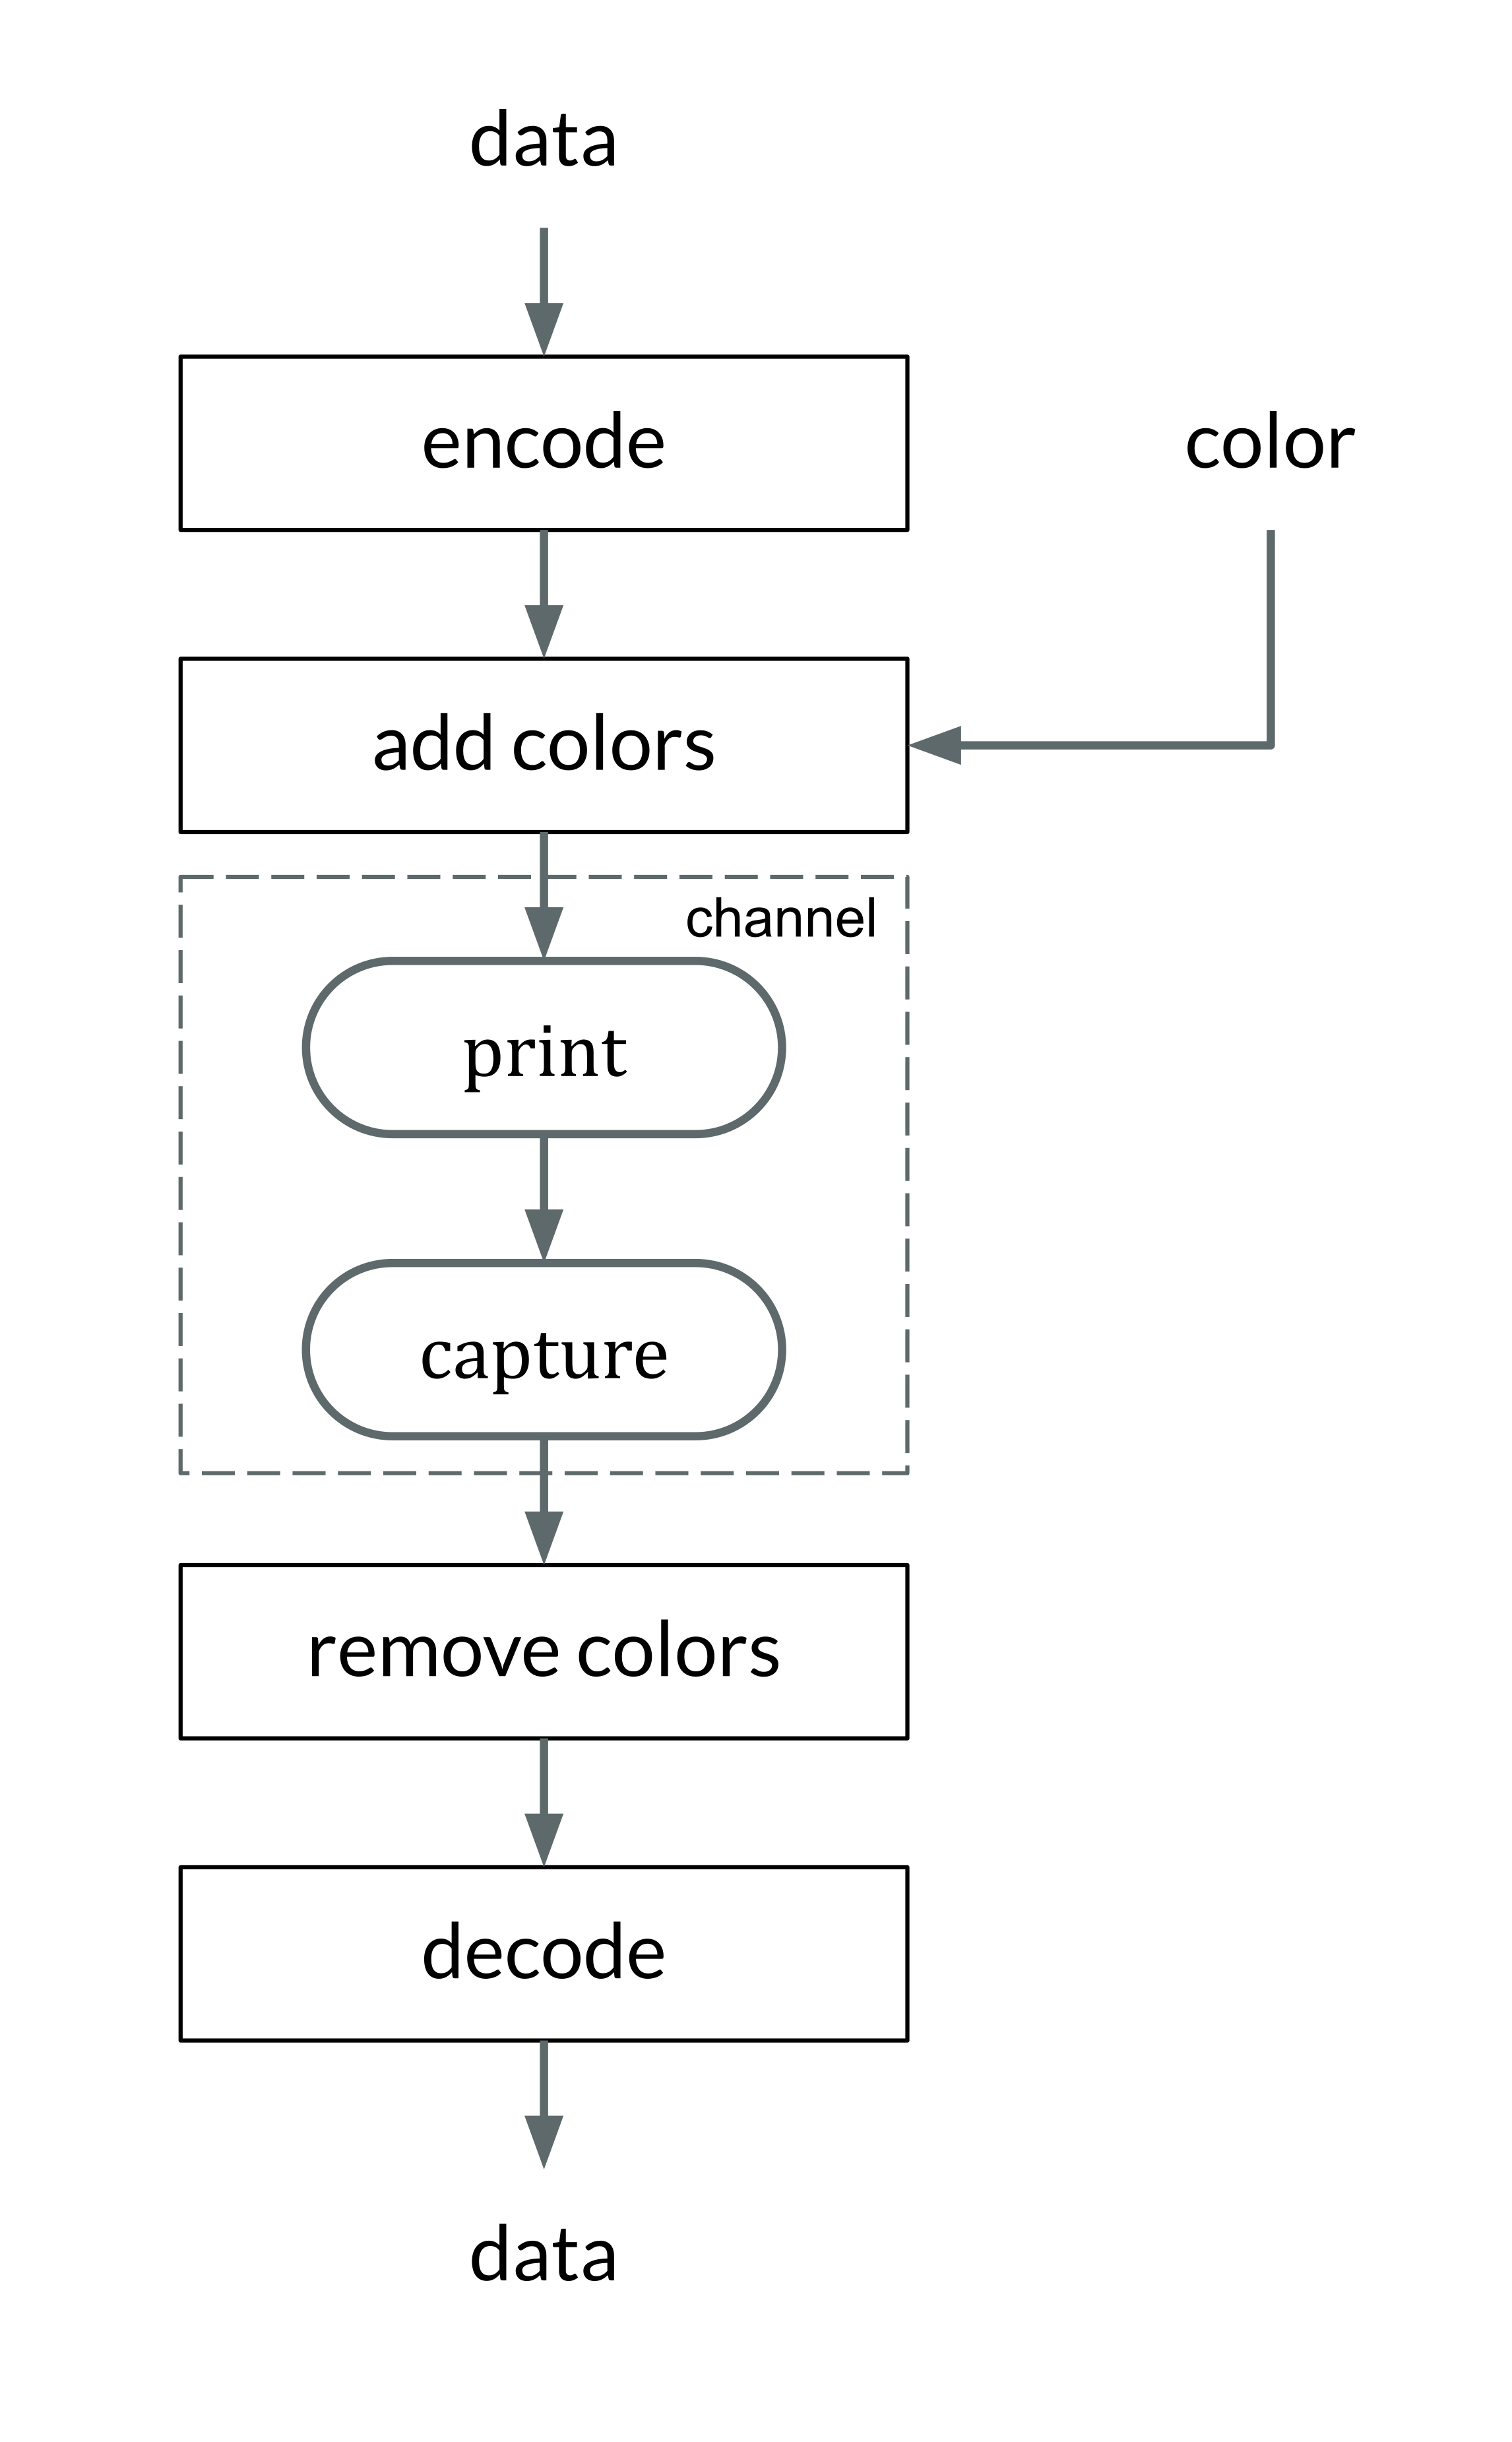 Block diagram for a general encoding-decoding process of a QR Code featuring the embedding of a color layer. This color layer could be used for a wide range of applications, such as placing a brand logo inside a QR Code. The process can be seen as a global encoding process (digital encode and color encode), followed by a channel (print and capture) and a global decoding process (remove colors and decode digital information). 